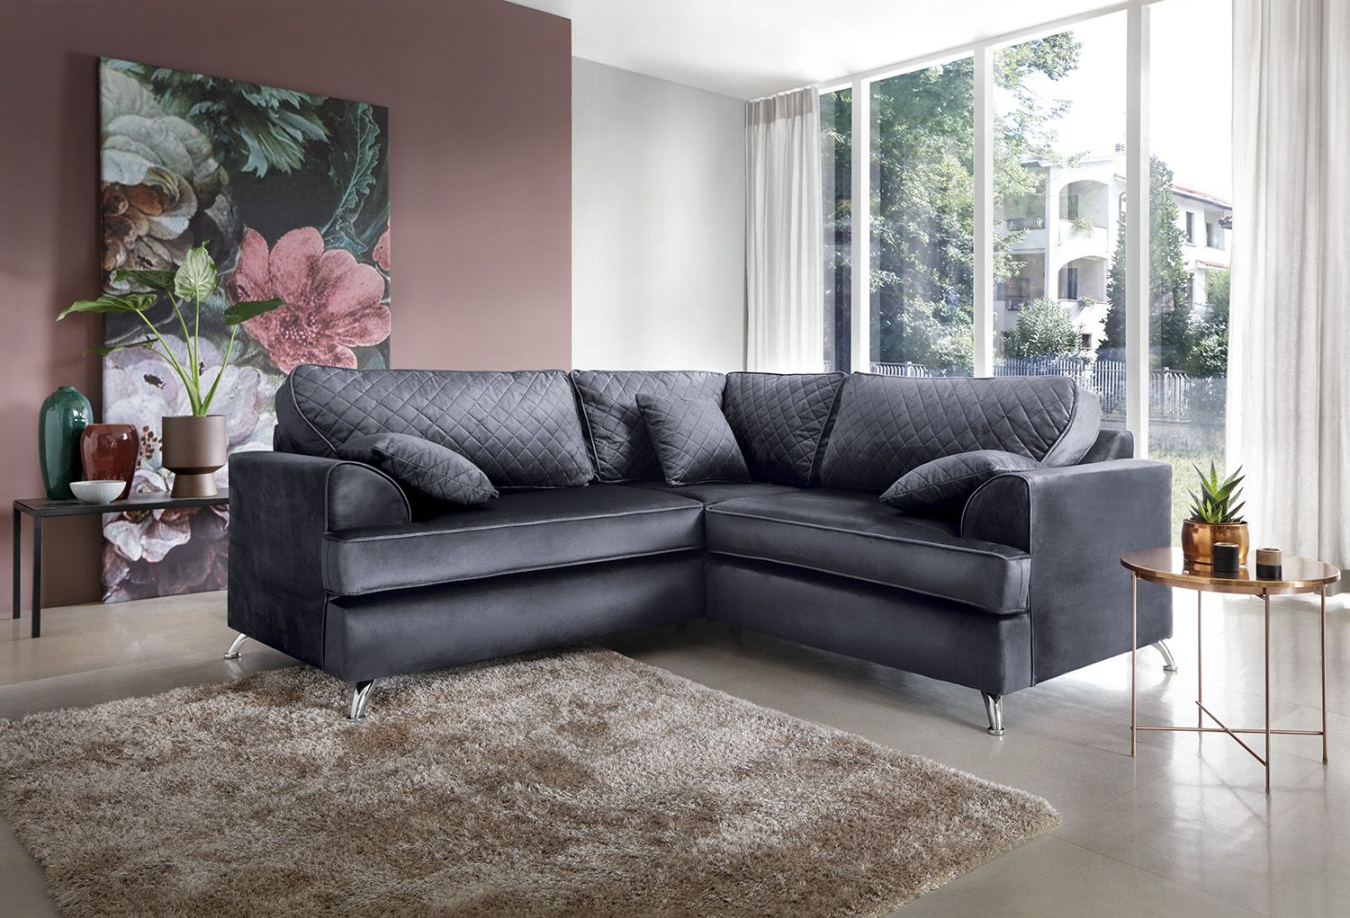 WHAT CURTAINS FOR WHAT SOFA COLOUR? DÉCOR TIPS! - Abakus